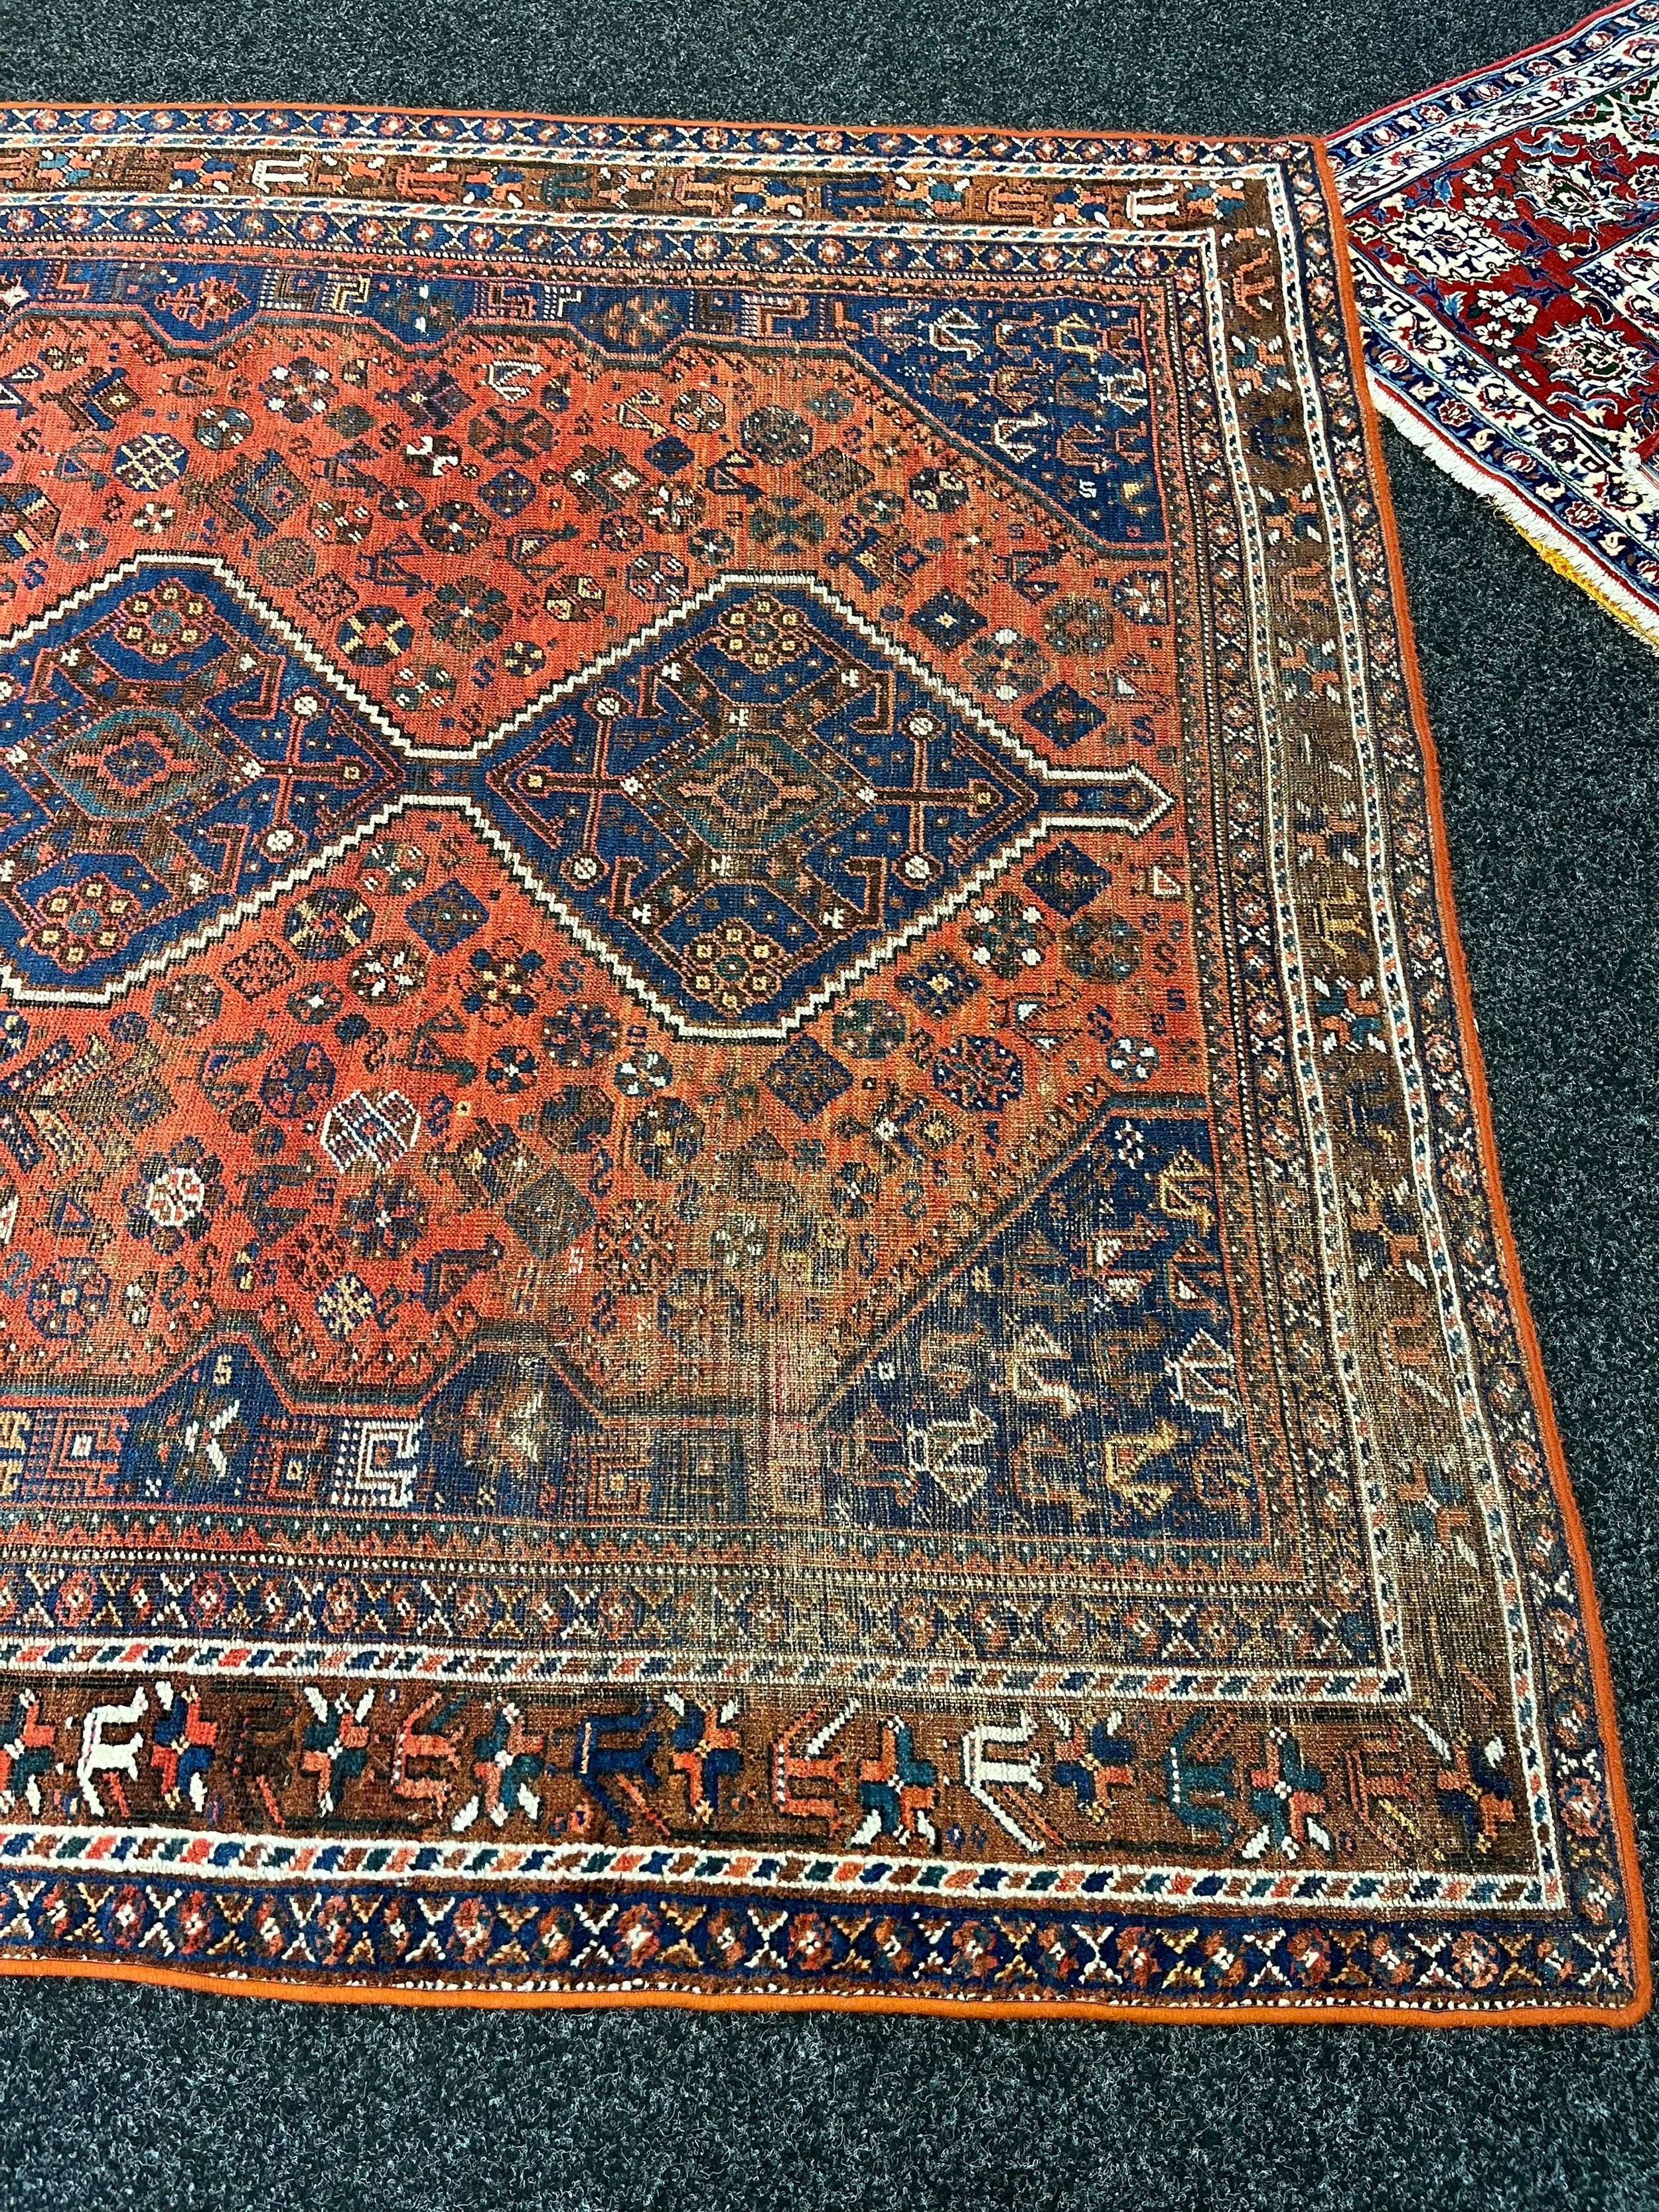 Provinz Gaschgai Iranian rug with certificate of authenticity [200x300cm] - Image 6 of 10